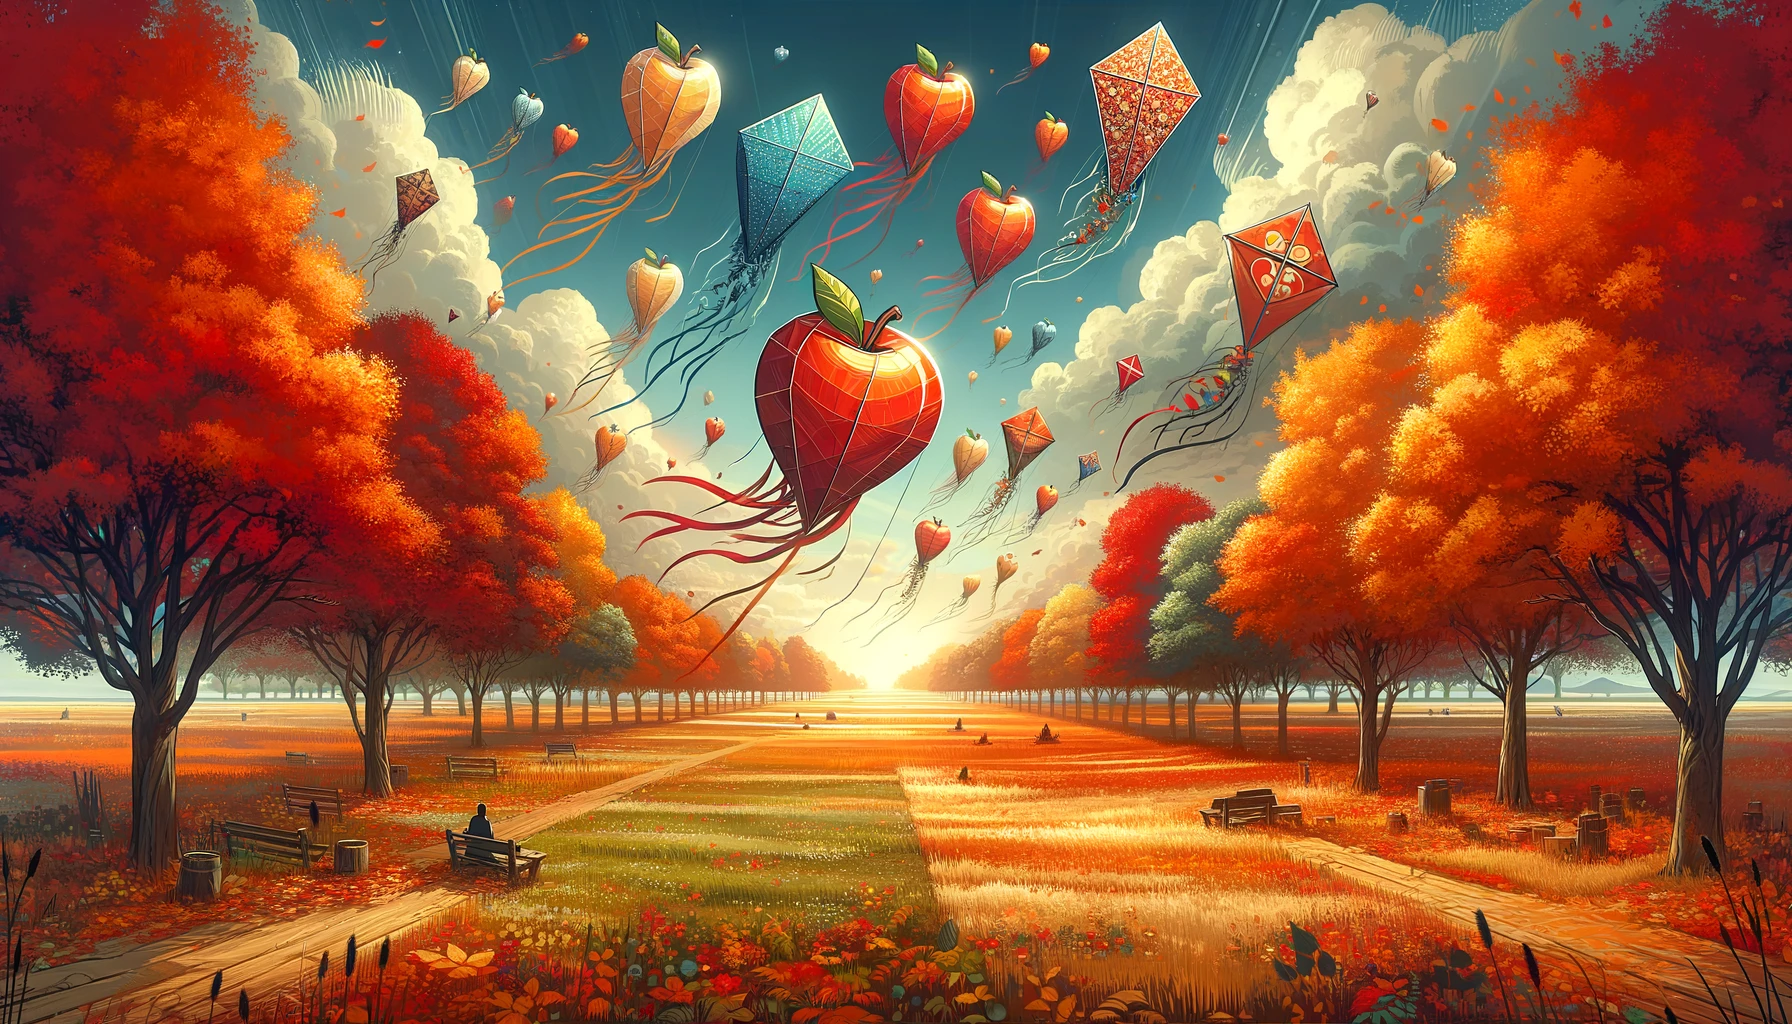 Kites in fall, apple themed